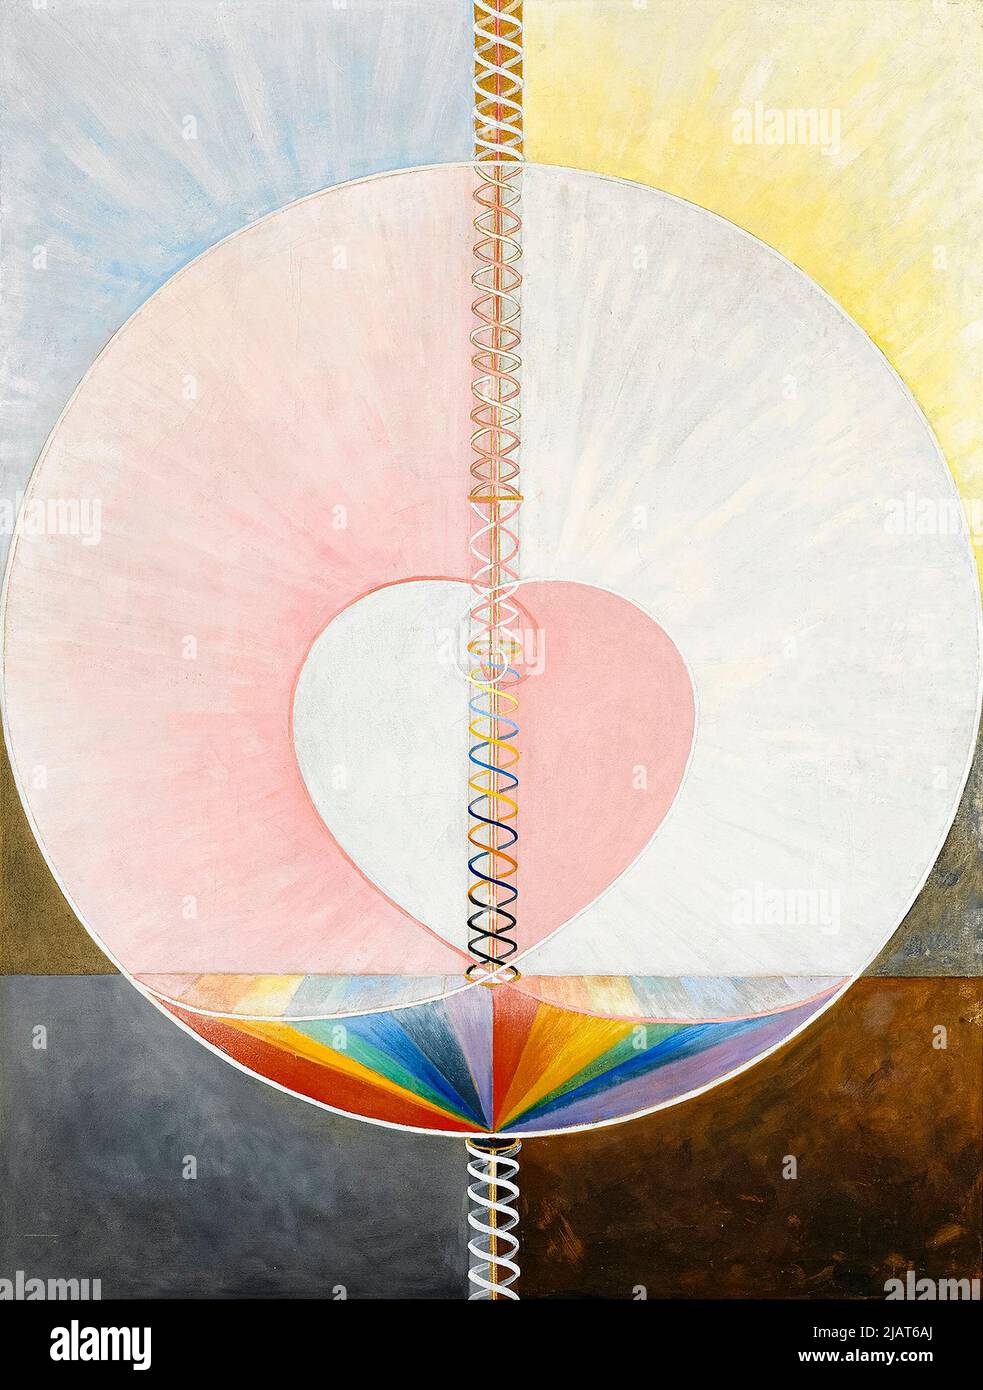 Hilma af Klint, Group IX,UW No 25, The Dove, No 1, abstract painting in oil on canvas, 1915 Stock Photo